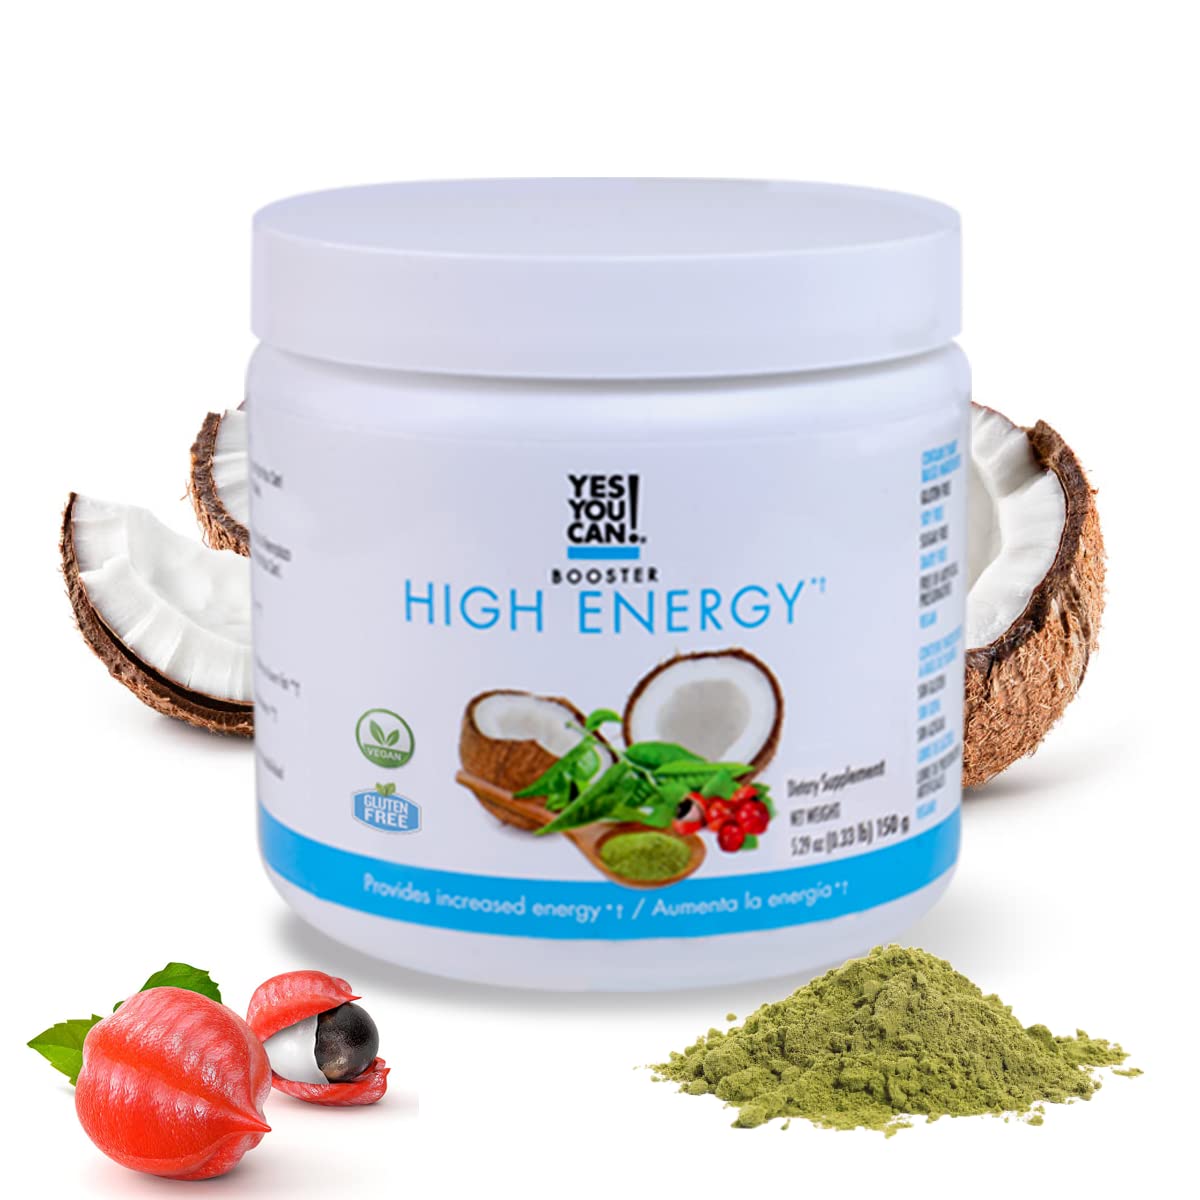 Yes You Can! Shake Booster High Energy Powder Drink Mix - Nutritional Drink with Raw Coconut, Natural Caffeine from Tea, Guarana Seed Extract, Vitamin B12, Alpha Lipoic Acid, 150g, 30 Servings- 1 Pack